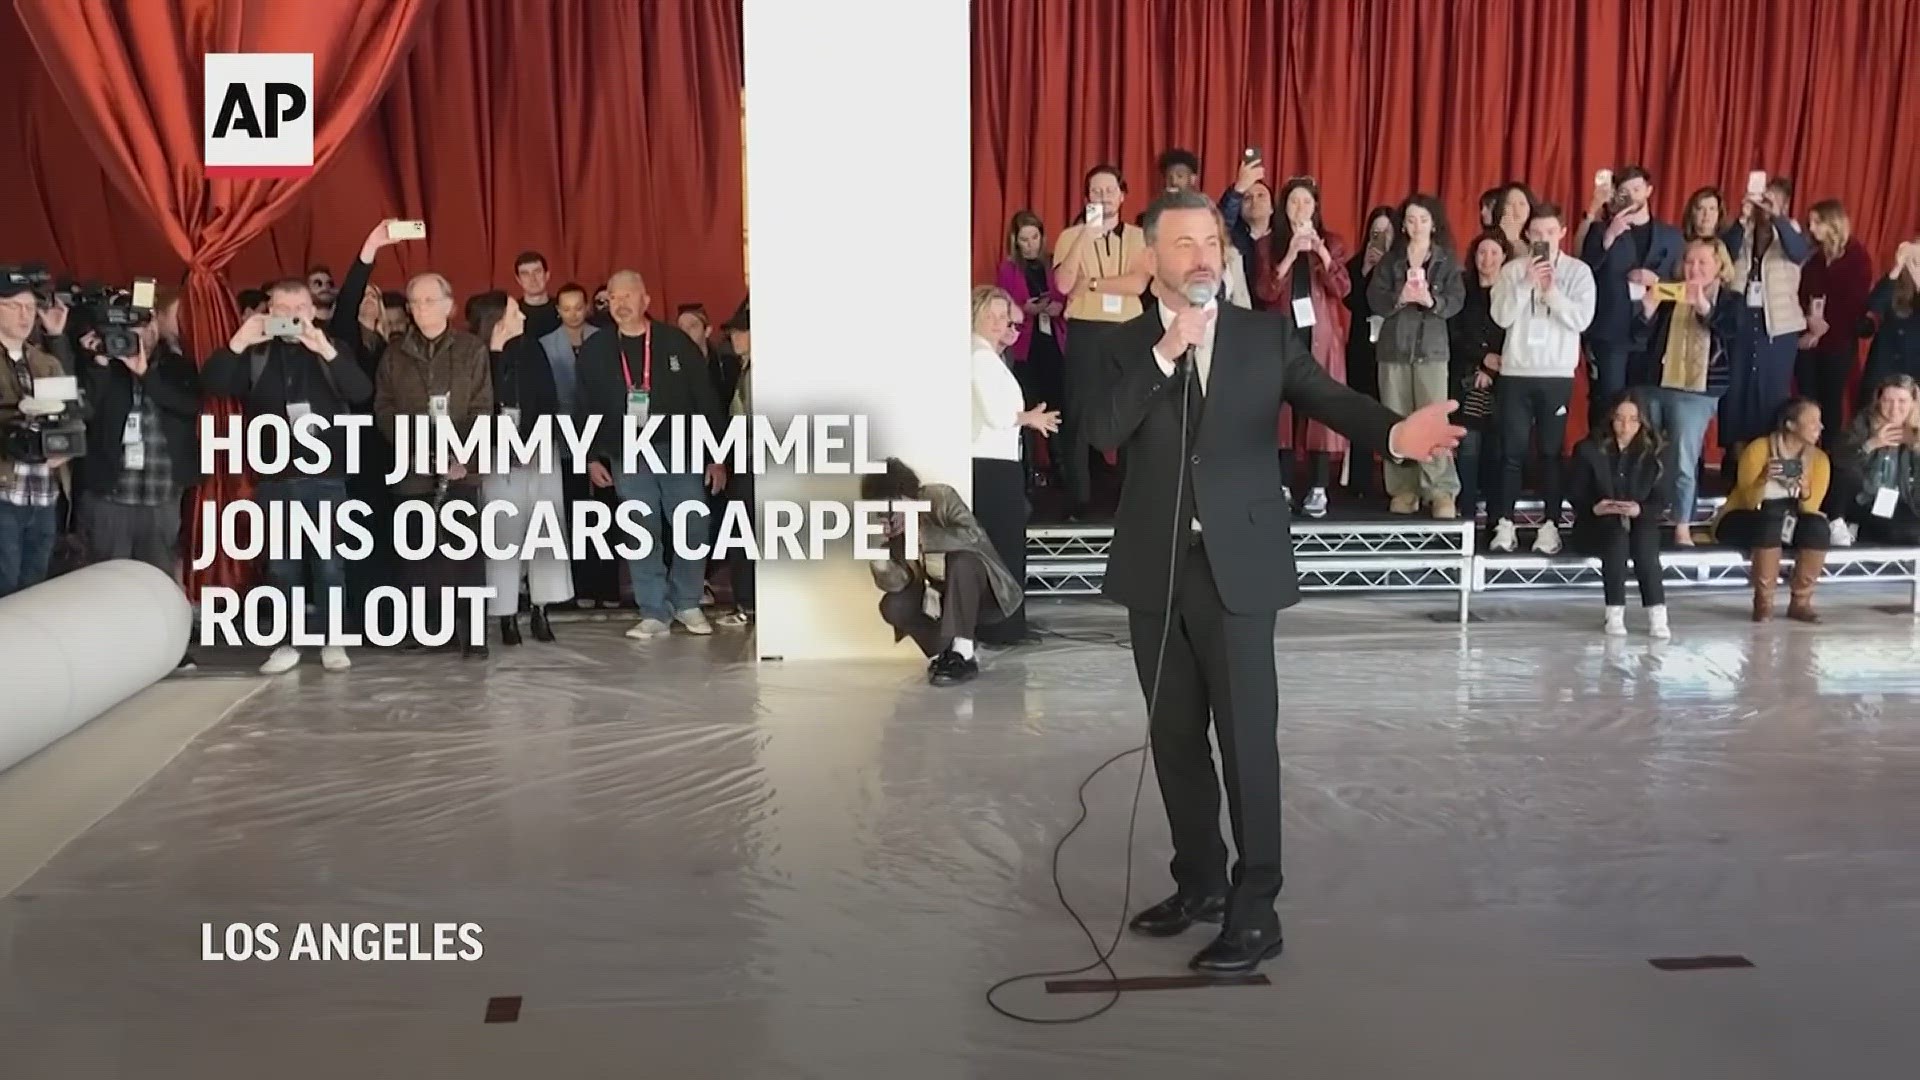 In a first since 1961, the Oscars carpet will not be red.